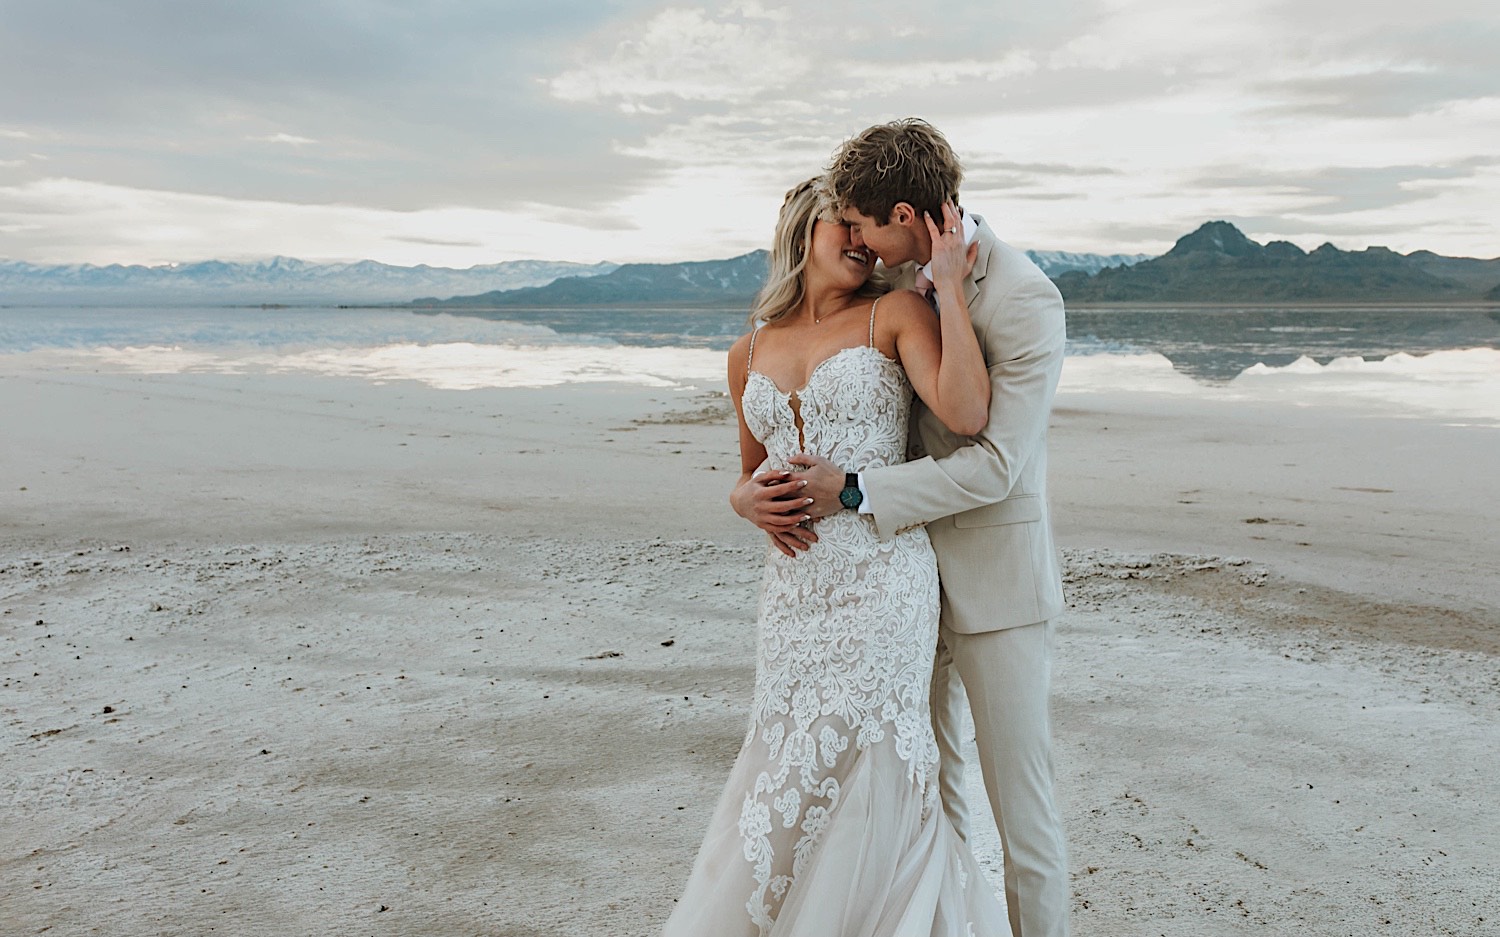 In the Utah Salt Flats a groom embraces the bride from behind during their elopement and are about to kiss one another as the bride smiles